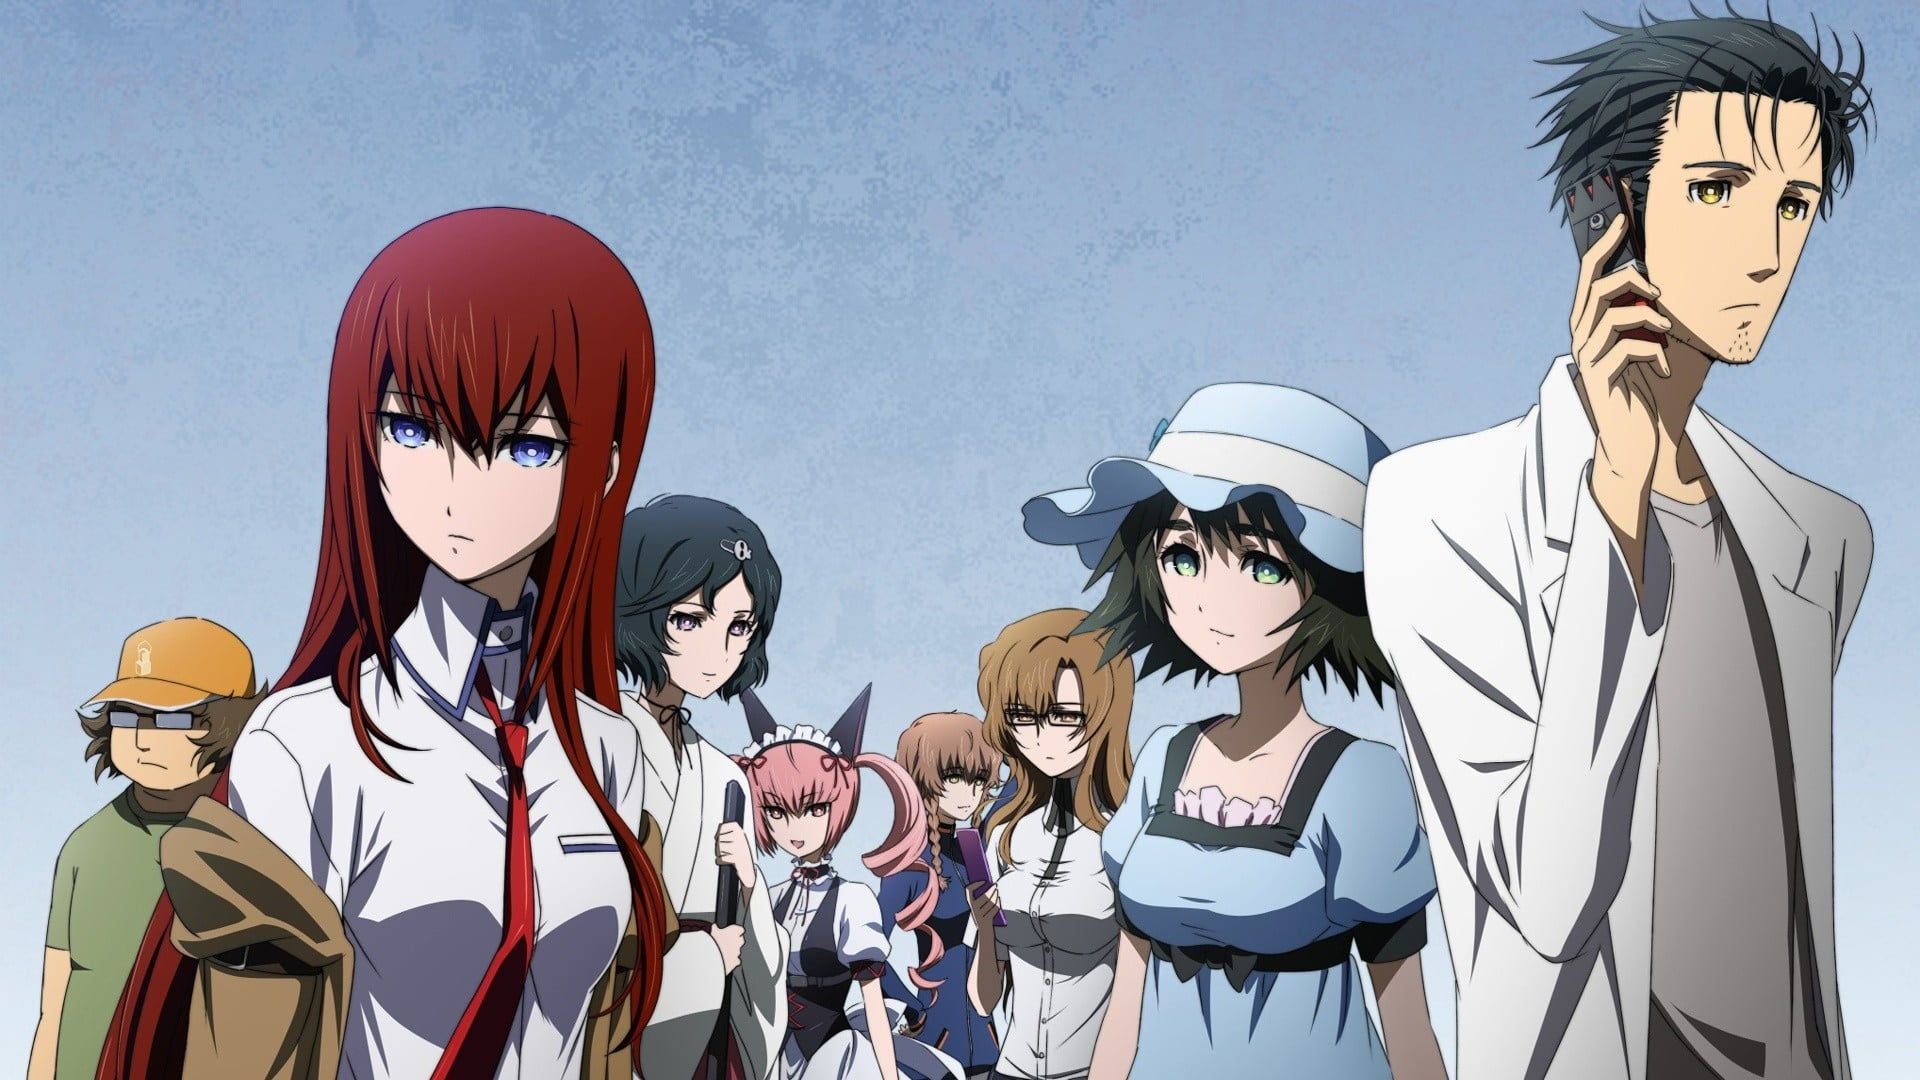 Steins;Gate: The Complete Series